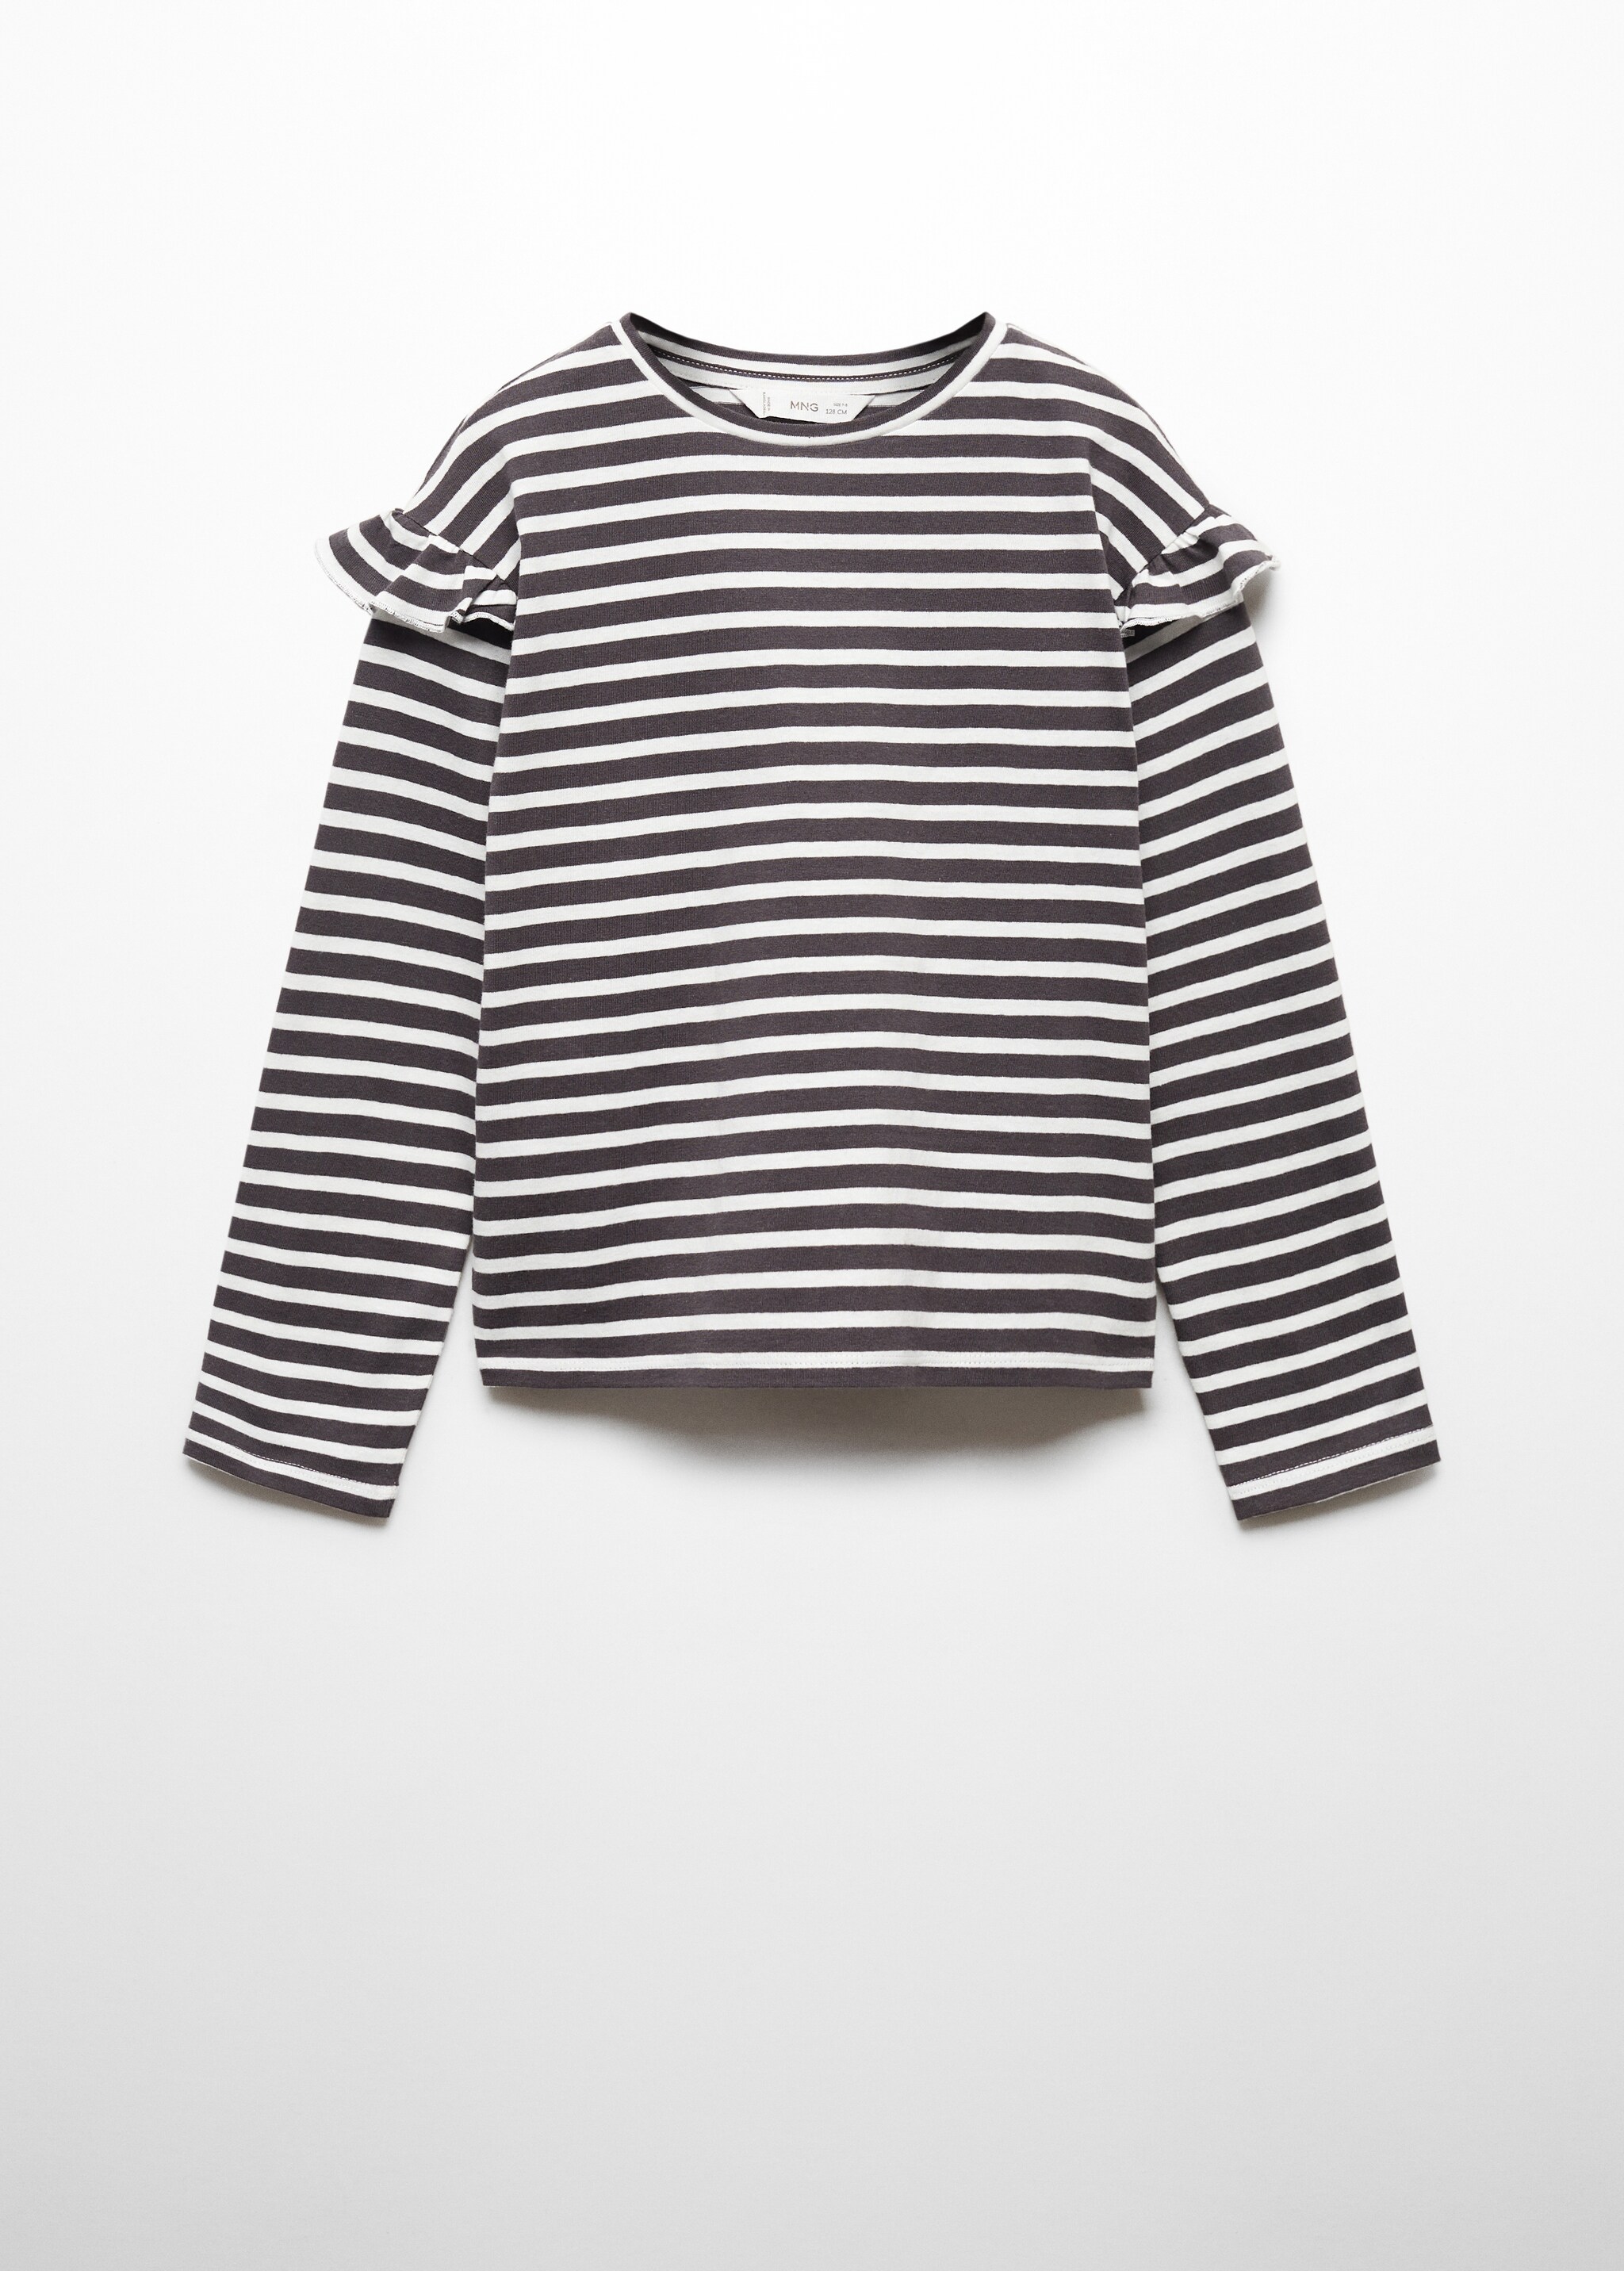 Striped ruffle sleeve t-shirt - Article without model